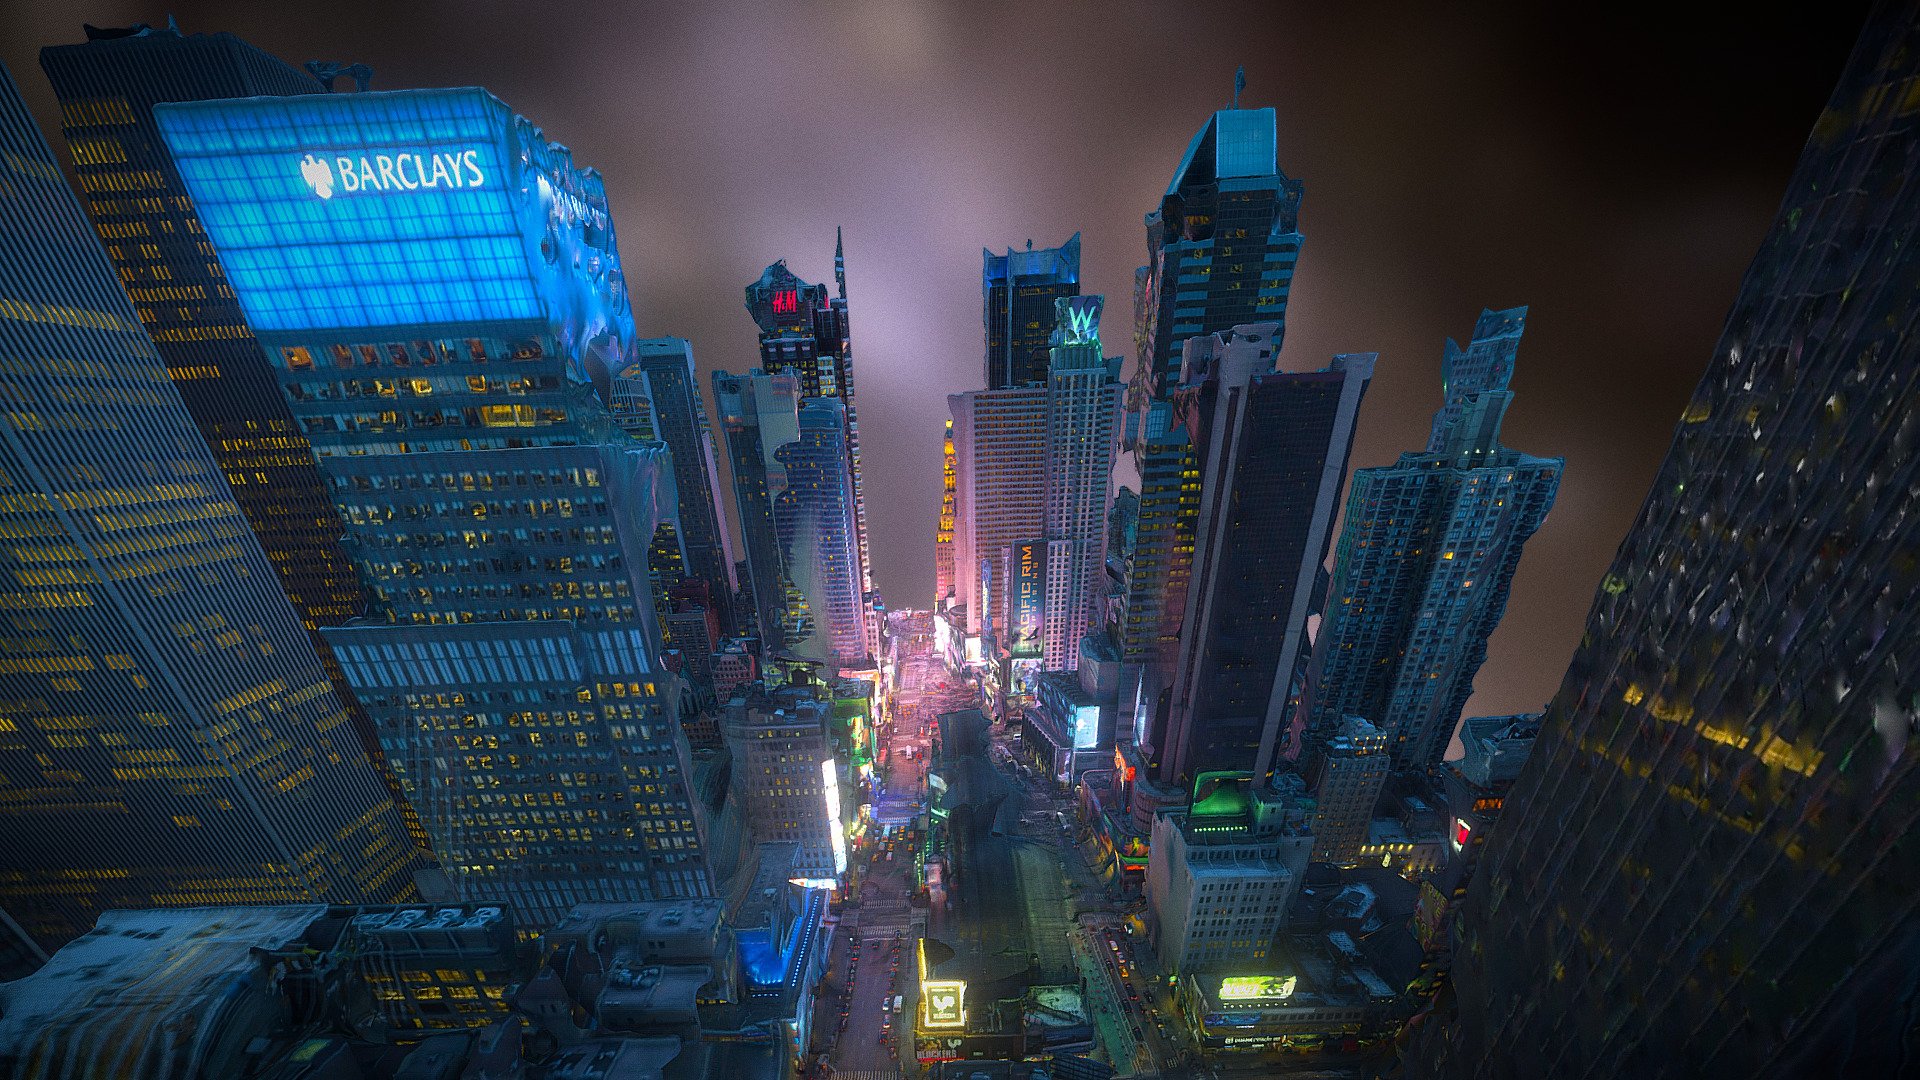 NYC New York city boulevard avenue street downtown skyscrapers skyline at night

Experimental vr, reconstructed from 8K drone footage only, looks best when moving straight in one direction (as with annotations).

2x16K textures

Consider 🎁 me a coffee https://www.buymeacoffee.com/matousekfoto - New York blvd 3d model